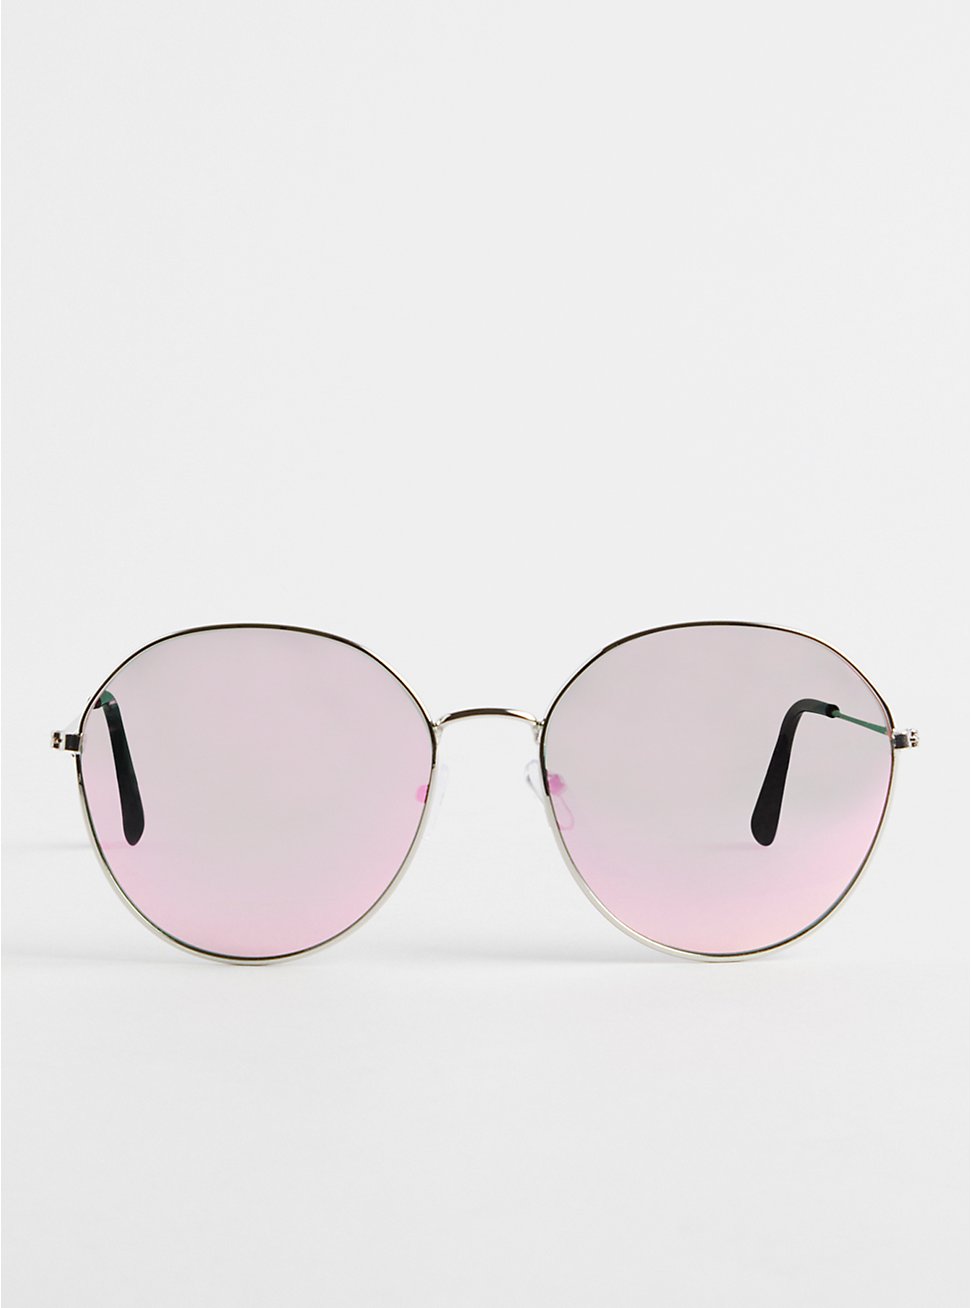 Plus Size Round Aviator with Reflective Lens, , hi-res